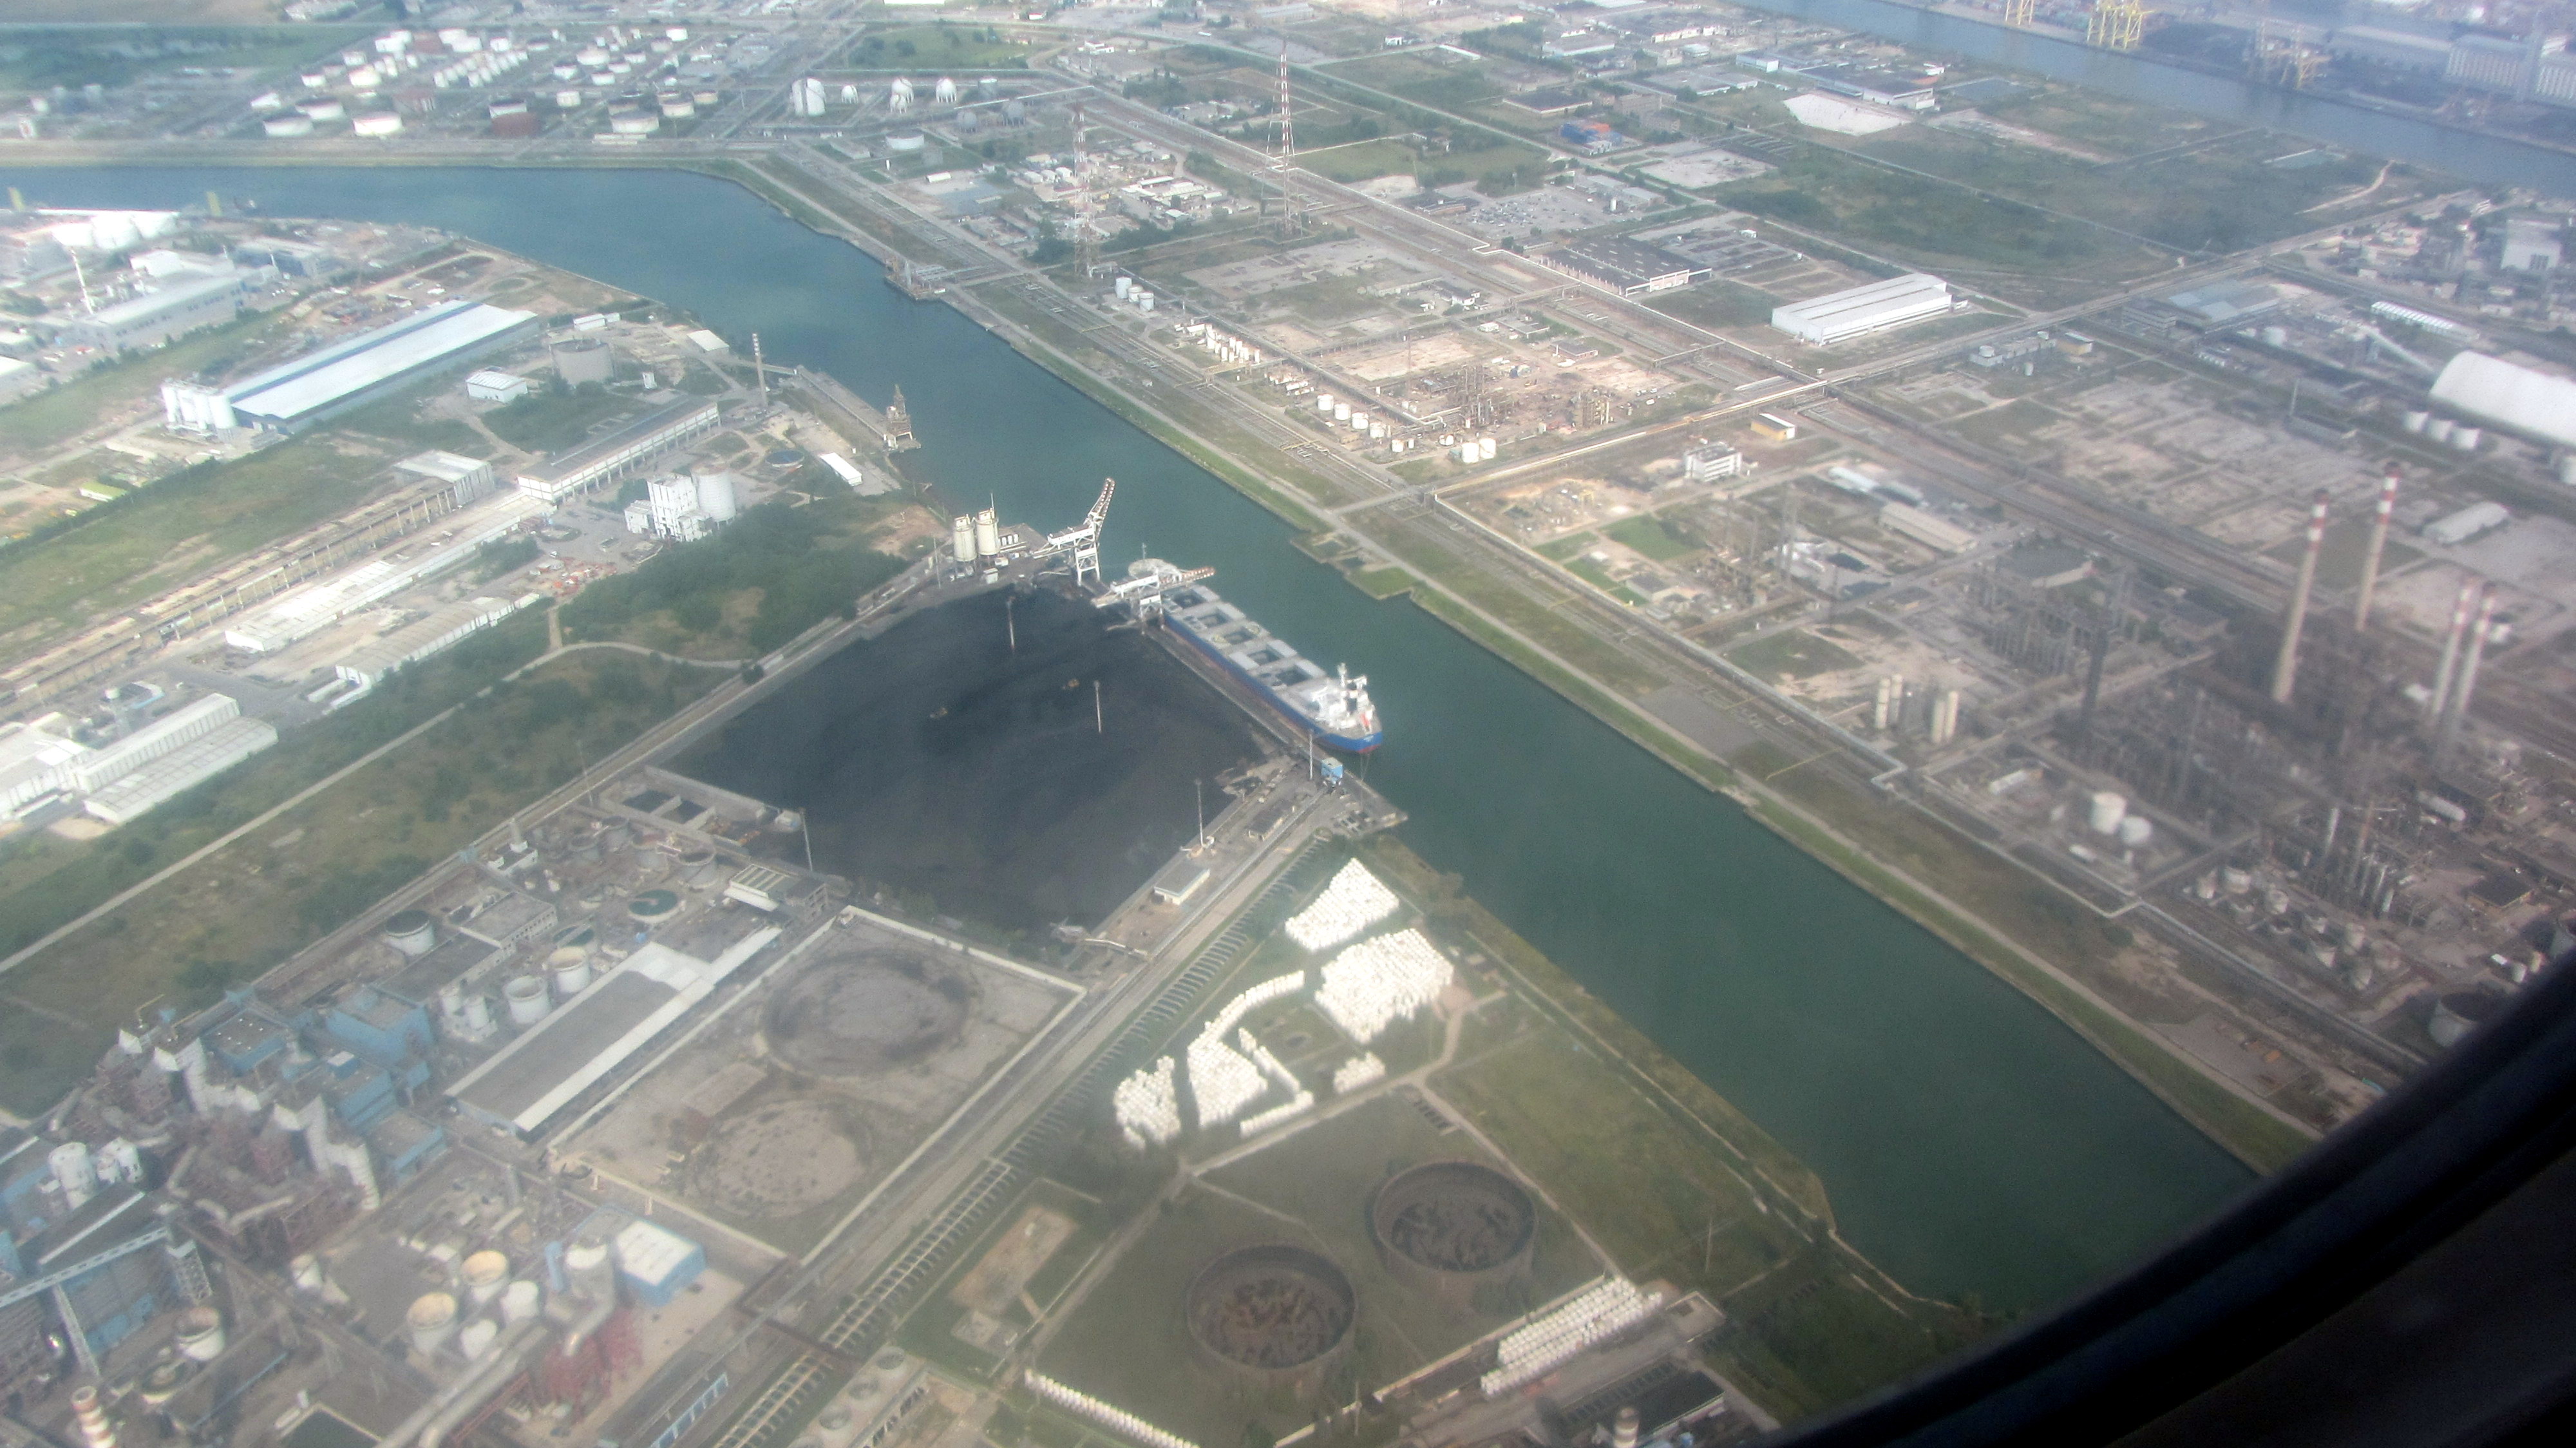 Descent towards Venice: the industrial area and harbour